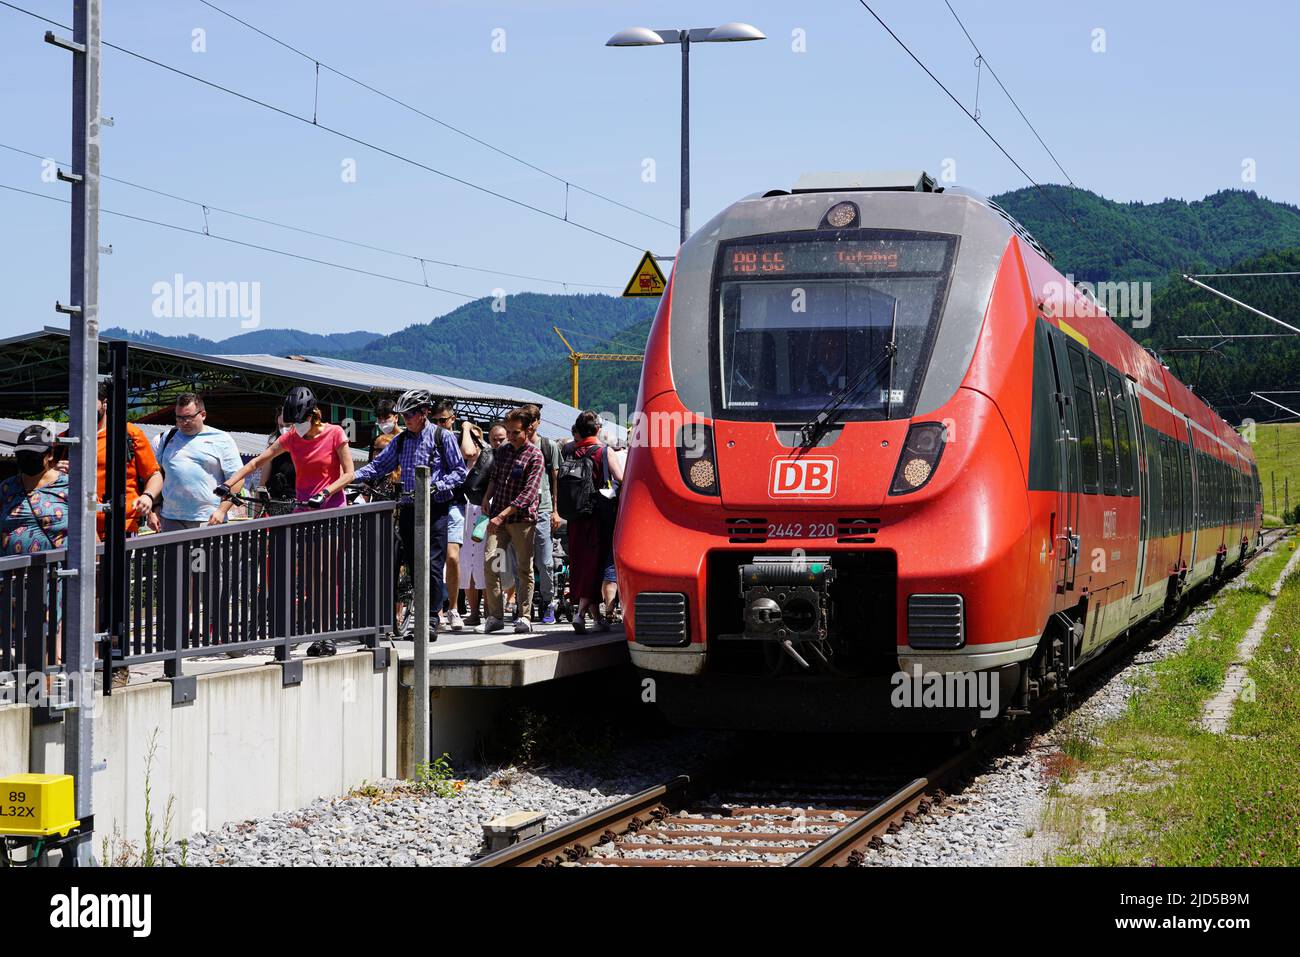 Day trippers from Munich get off a train, line R66, at the station Kochel to continue to the Kochelsee or Walchensee by bus, Kochel, Germany, 18.6.22 Stock Photo